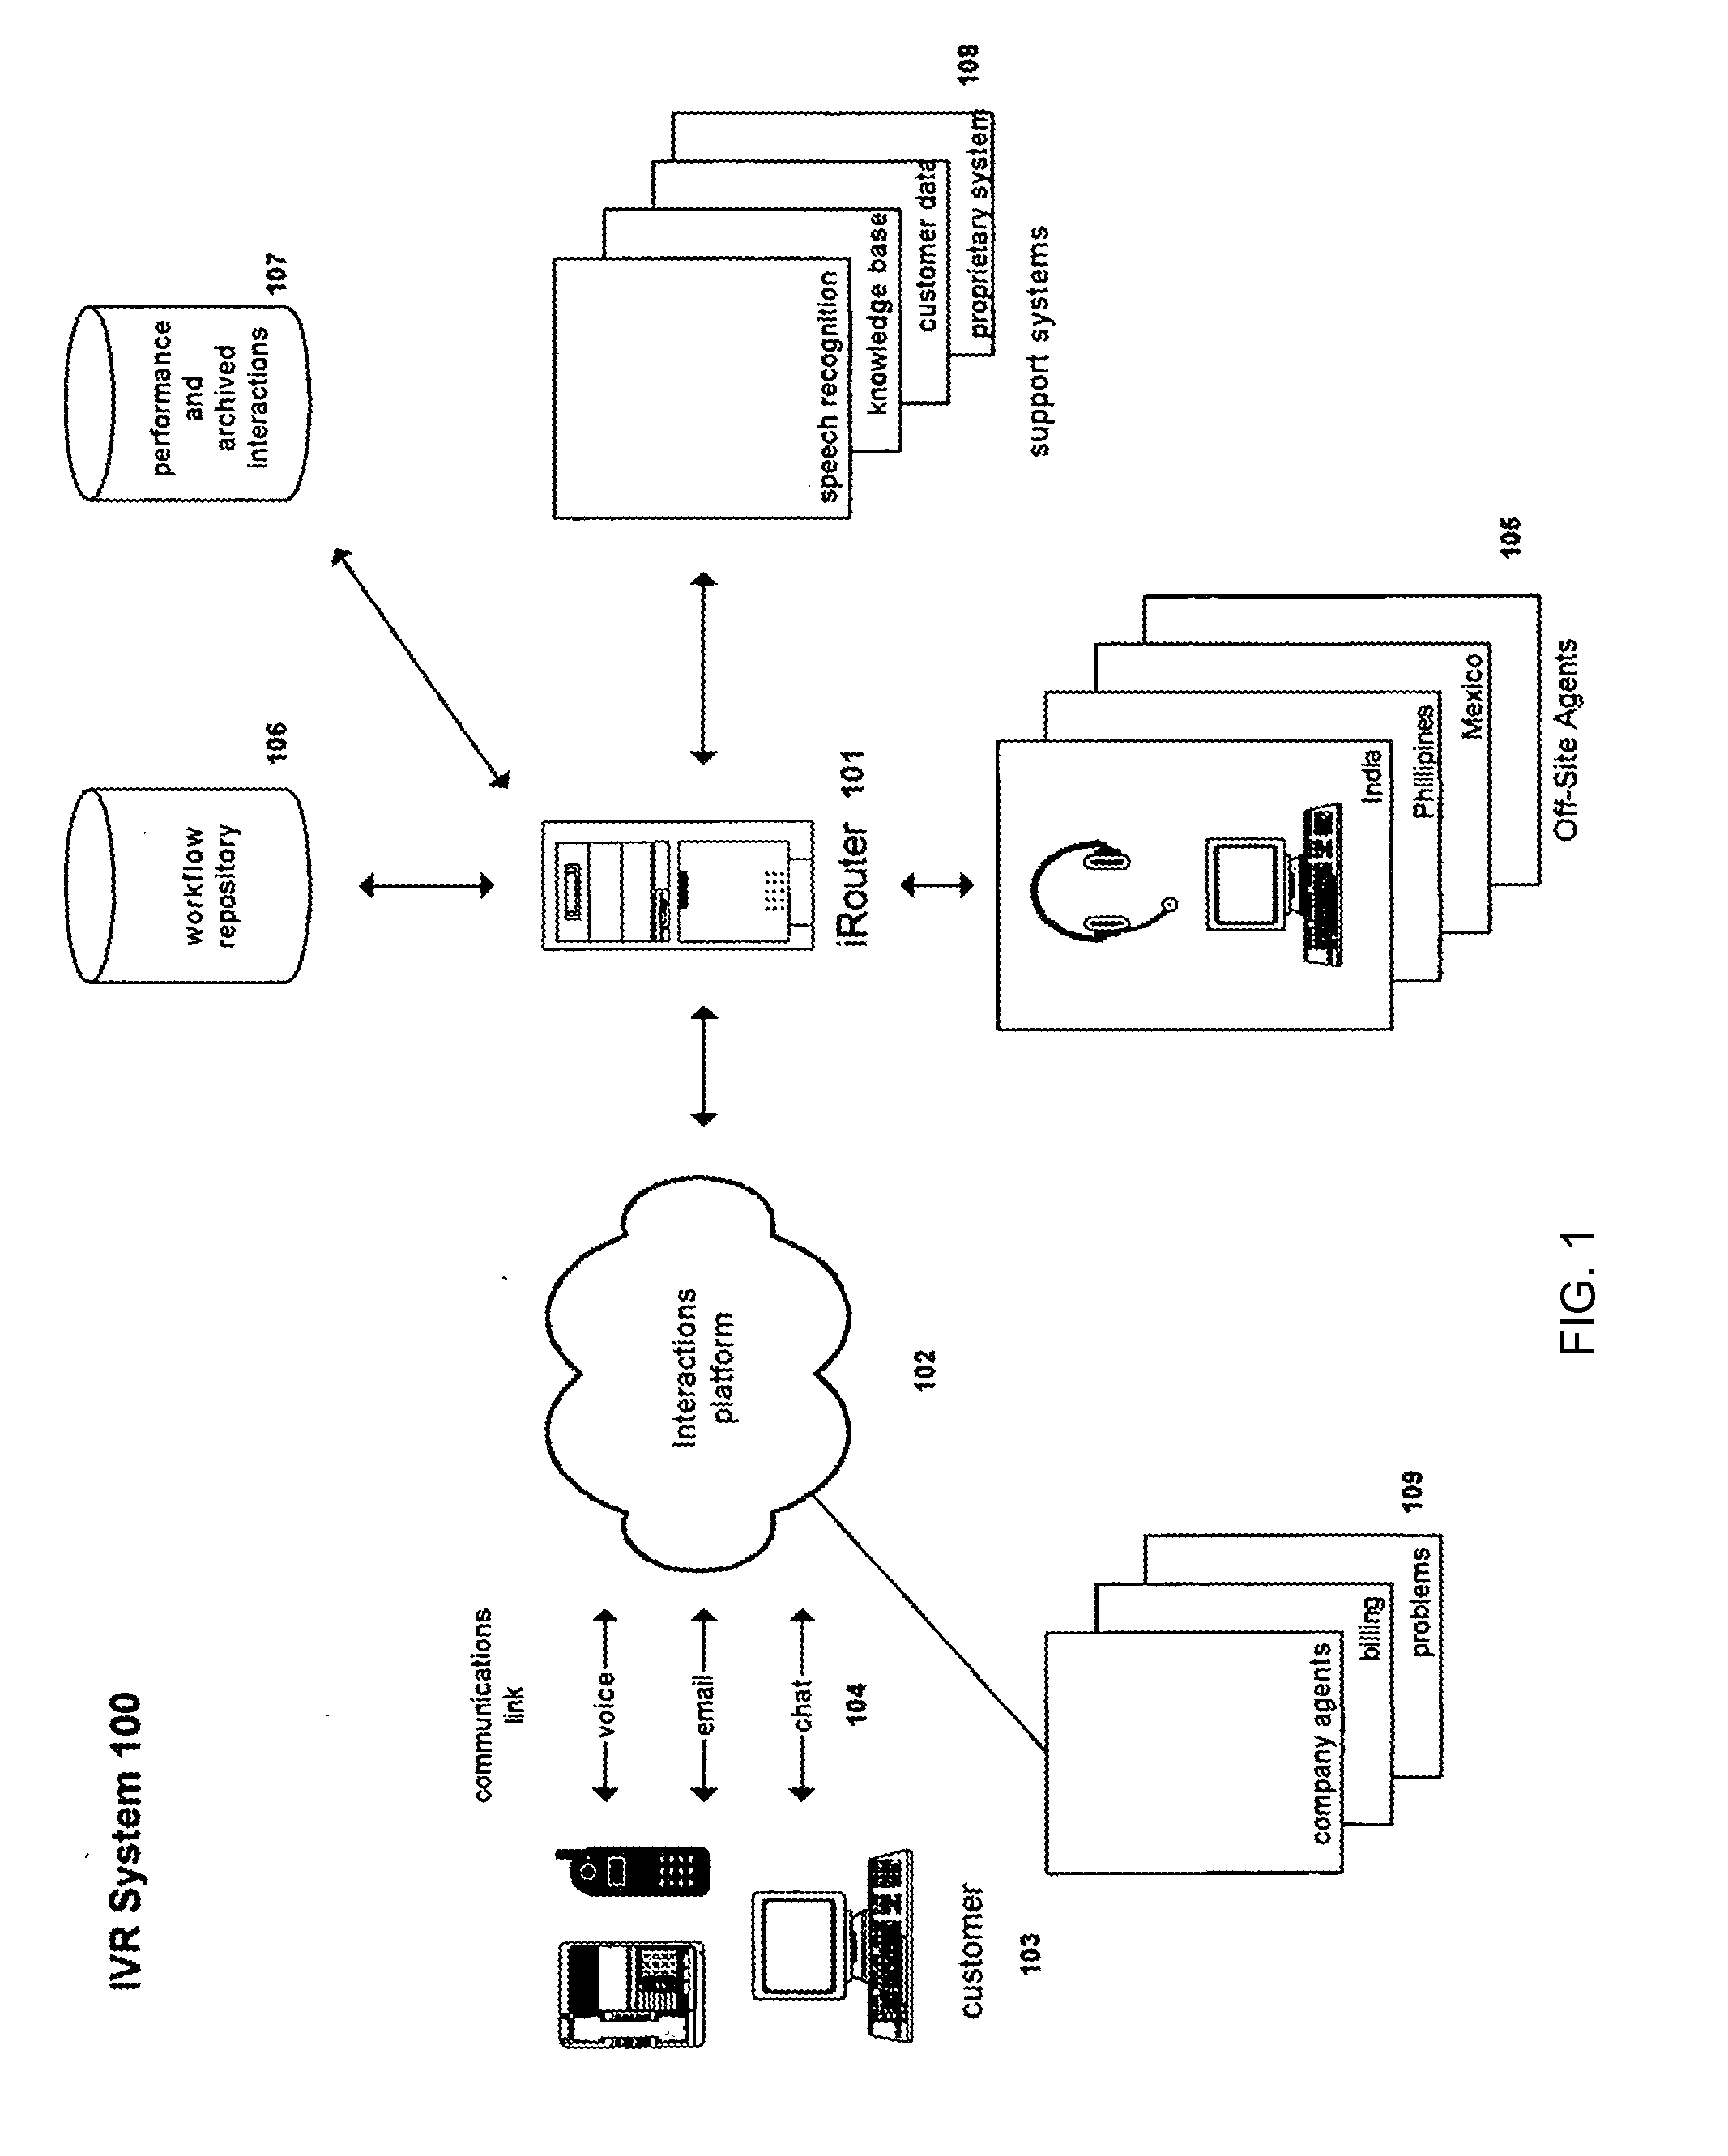 Automated Speech Recognition Proxy System for Natural Language Understanding